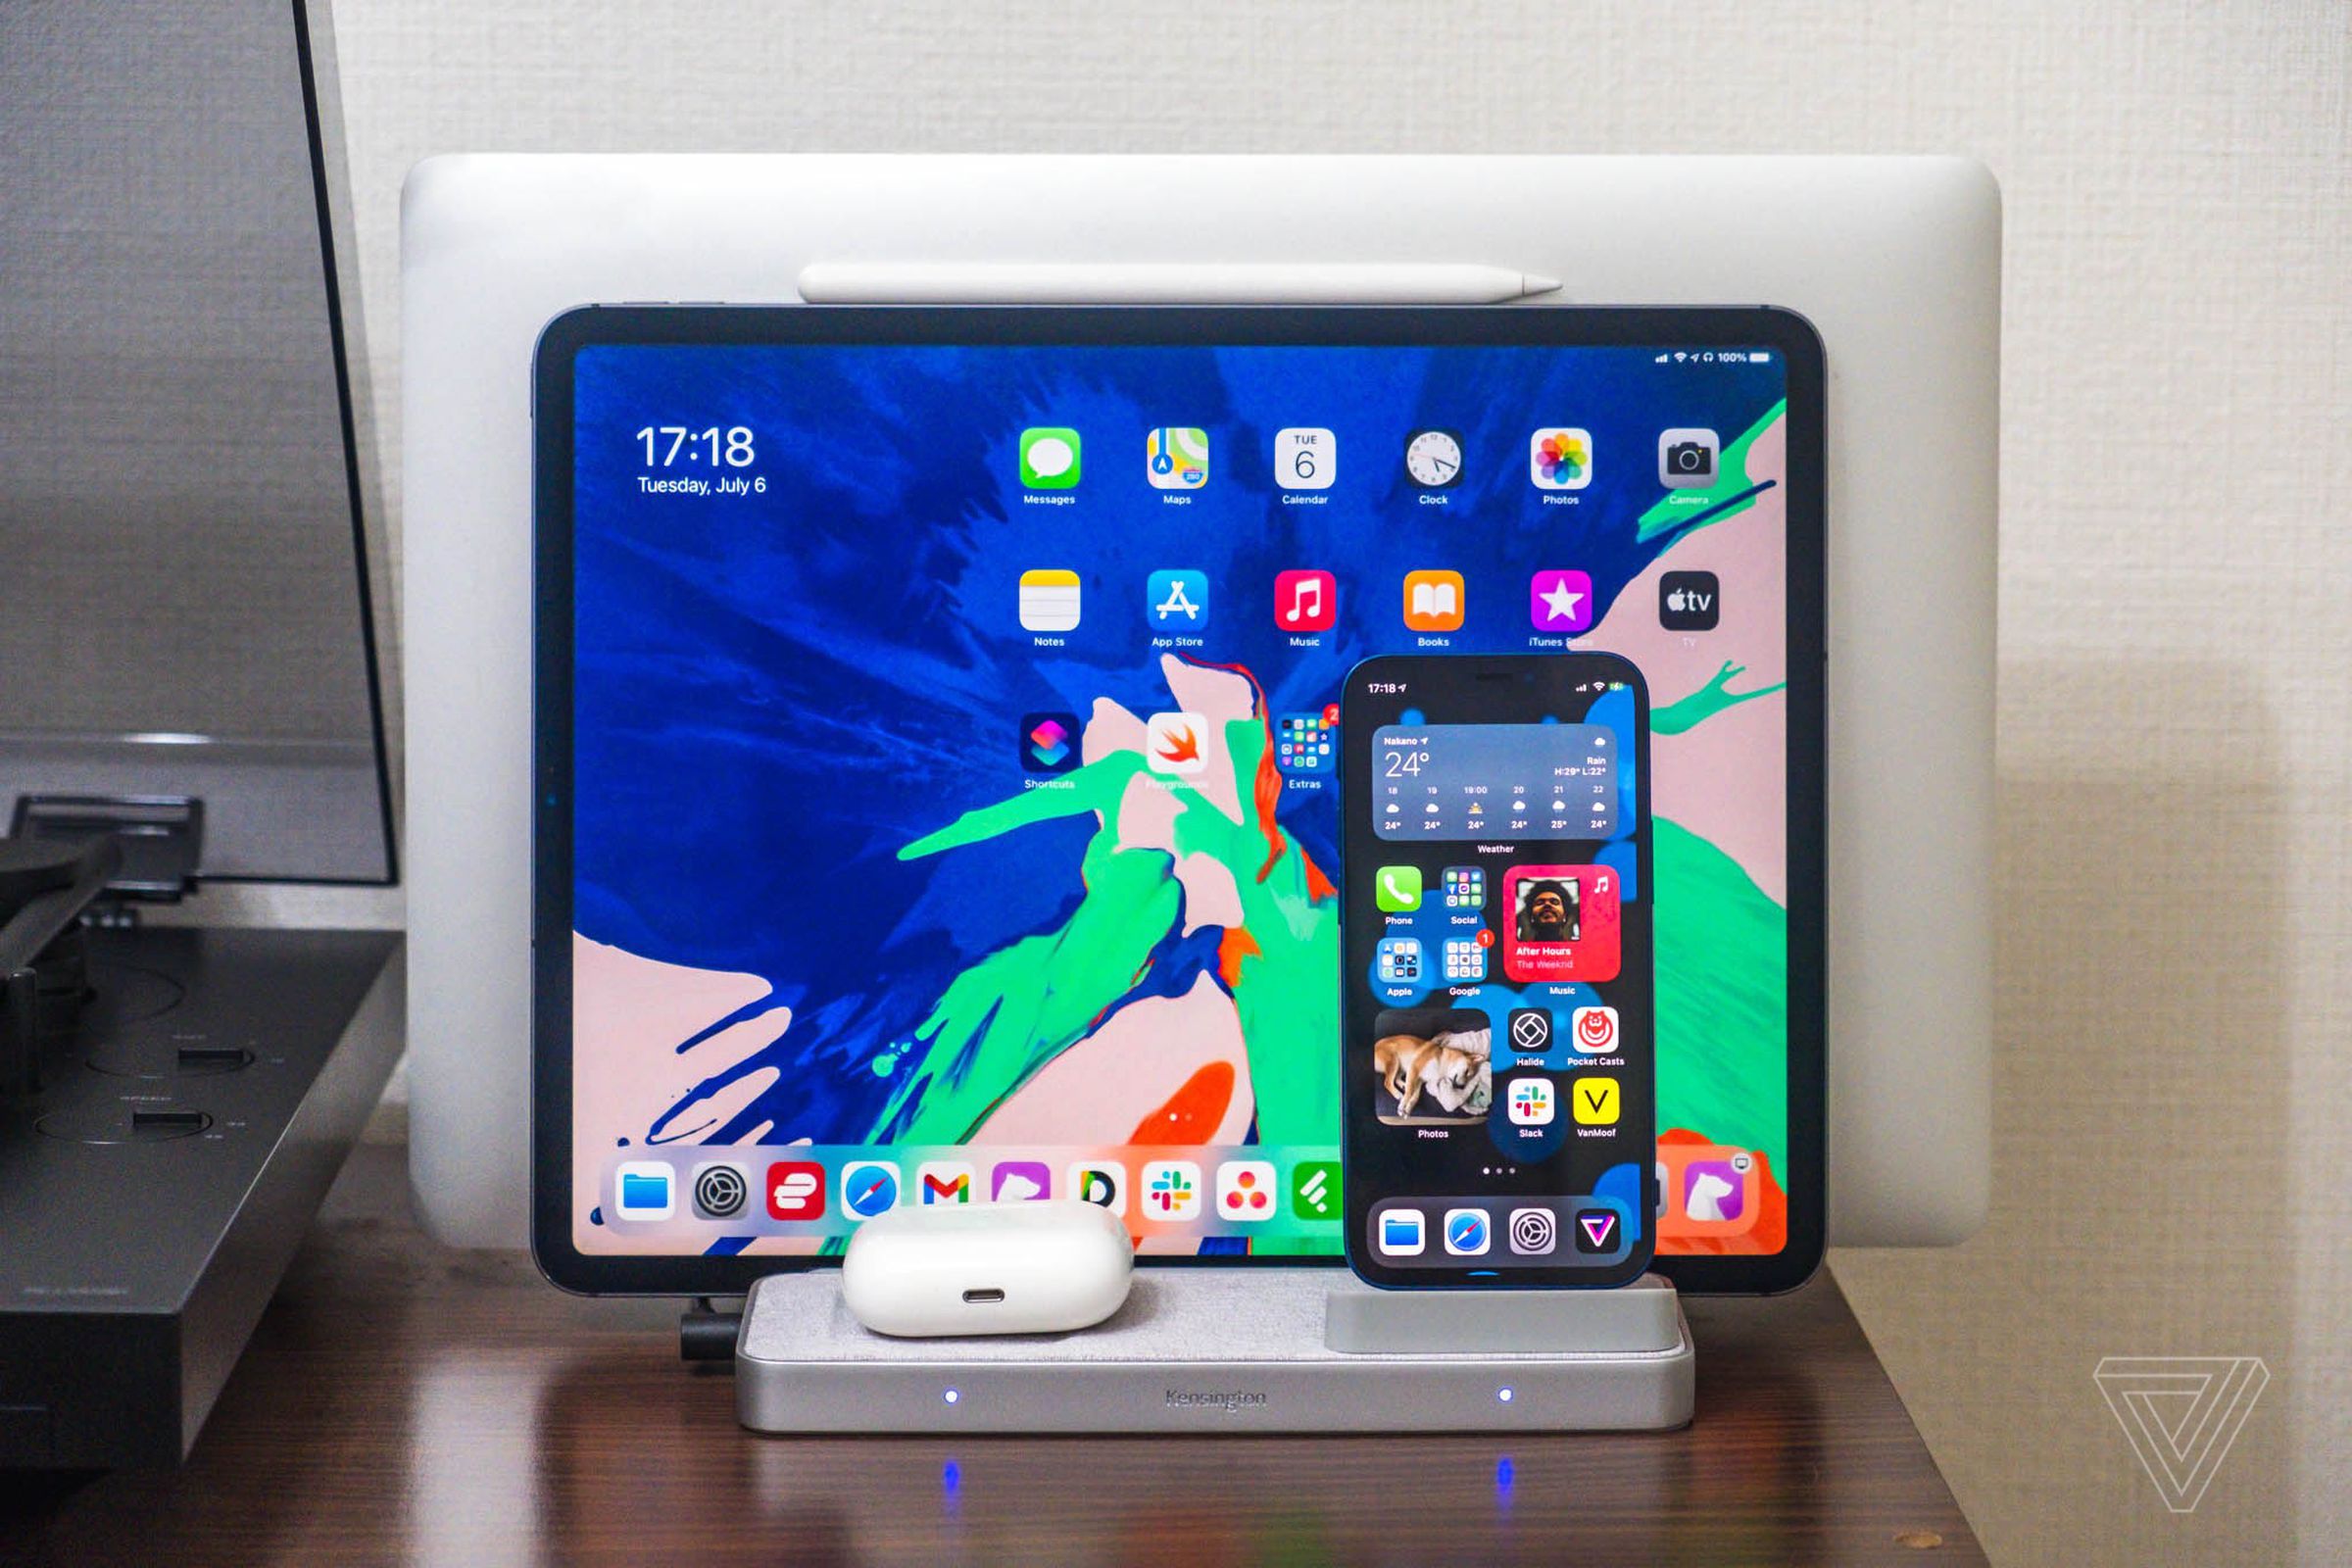 The StudioCaddy is designed to hold a MacBook and iPad while wirelessly charging an iPhone and AirPods.